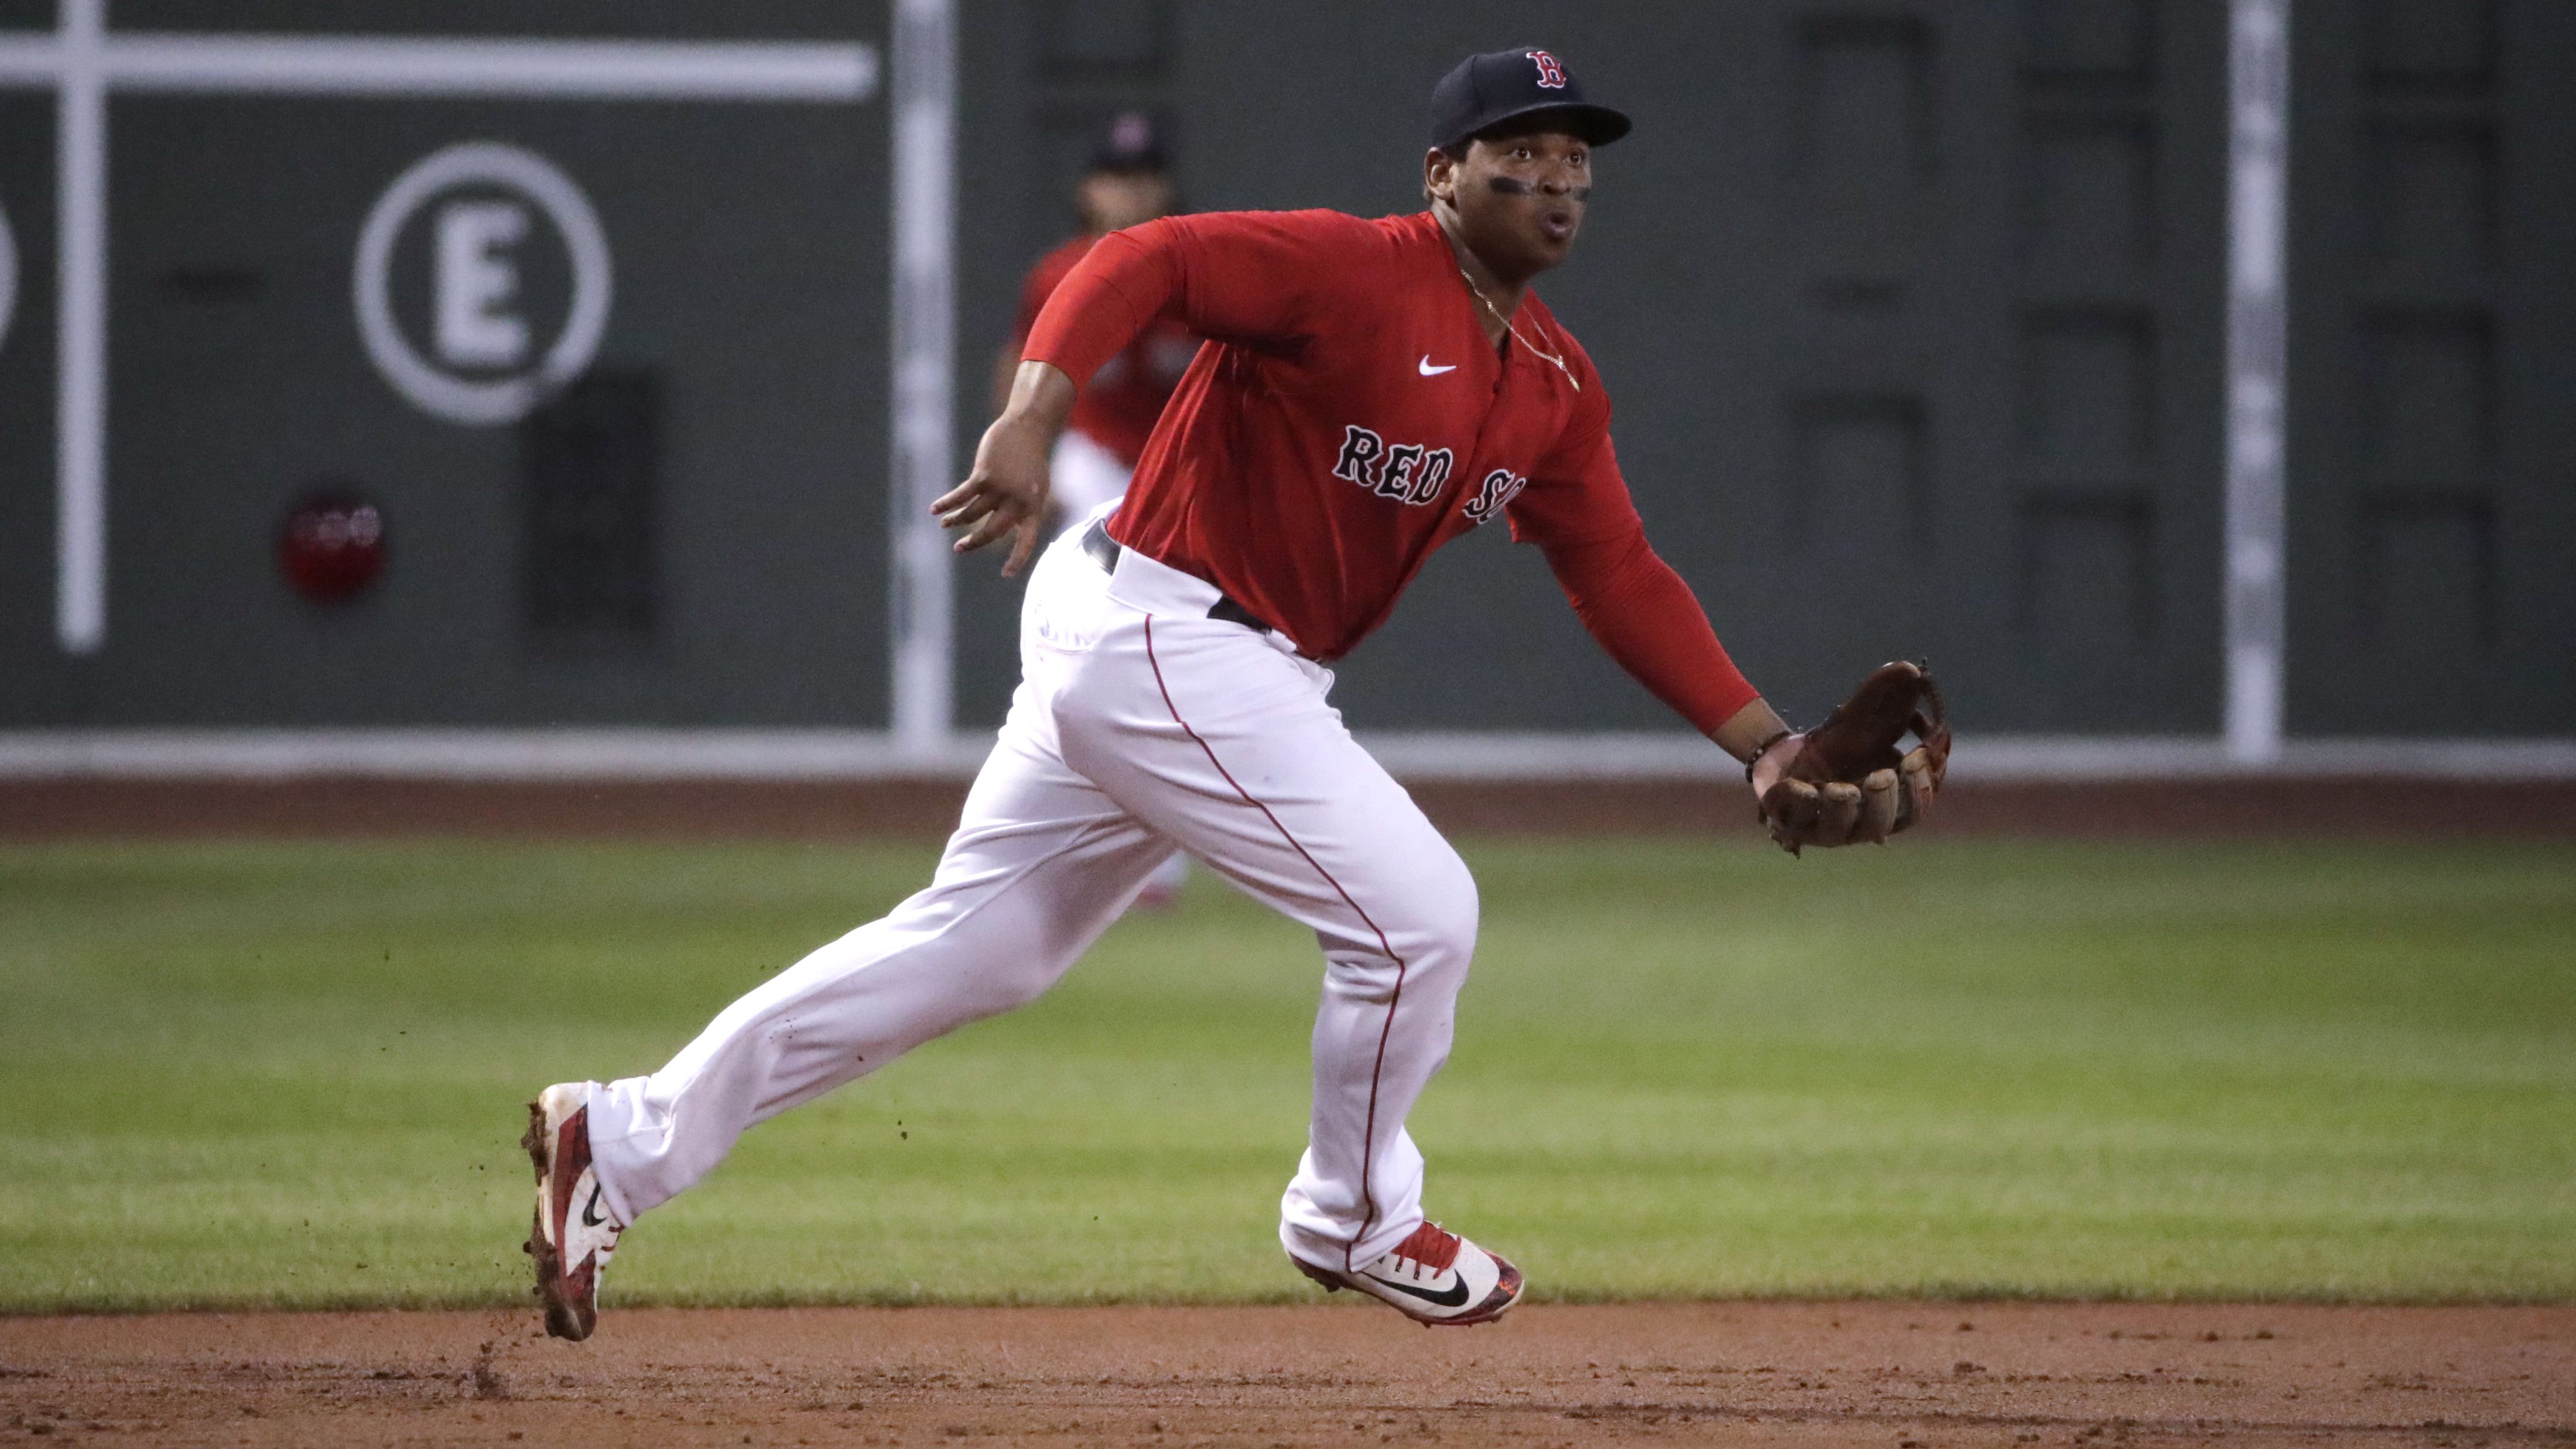 Can Red Sox 3B Rafael Devers be even better in 2020?